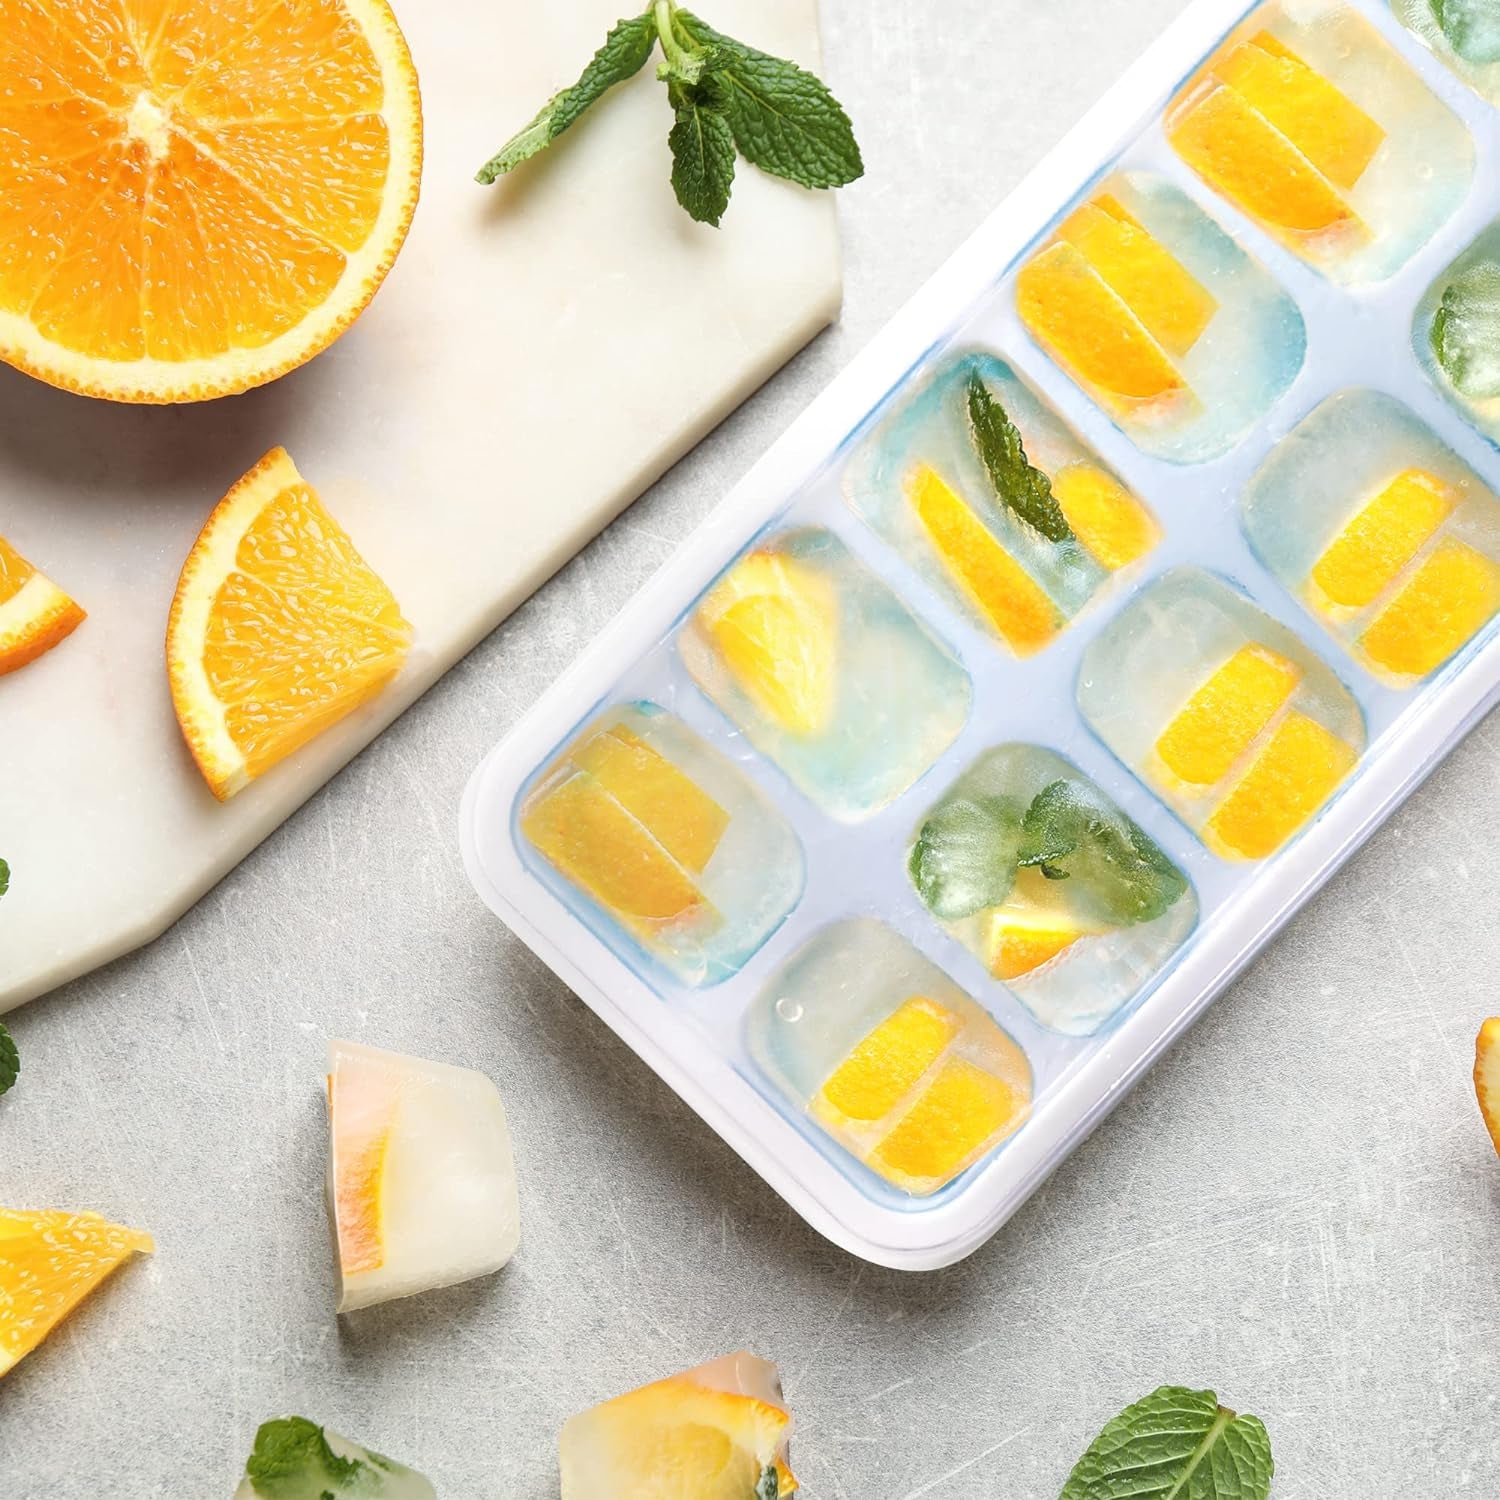 2 Pack Silicone Ice Cube Trays (25X9.5Cm) with Non-Spill Flexible Moulds Lids Easy to Remove Ice Cube Tray LFGB Certified BPA Free Perfect for Baby Food,Cocktails and Other Drinks Green & Blue